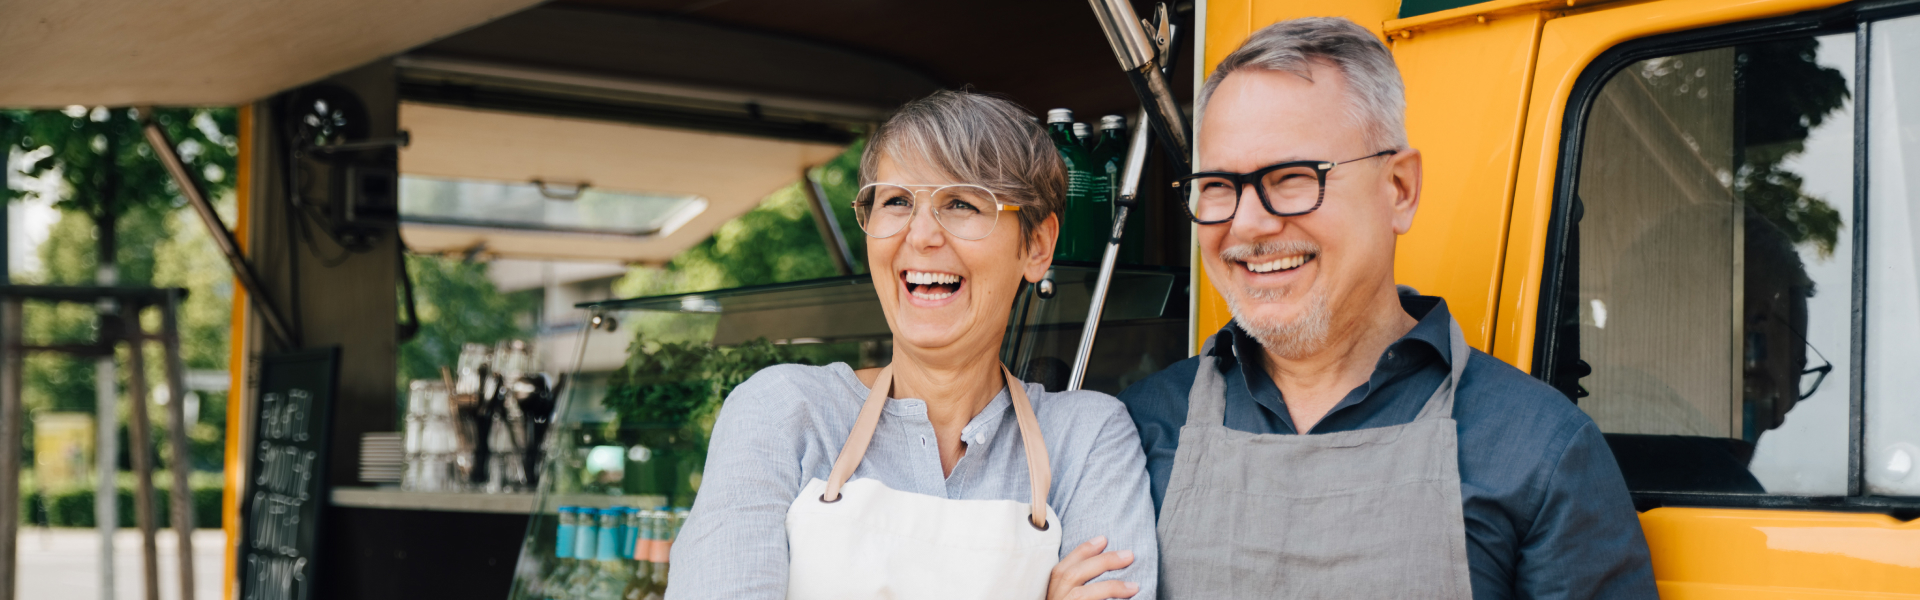 An older man and woman are smiling and standing in front of a food truck.